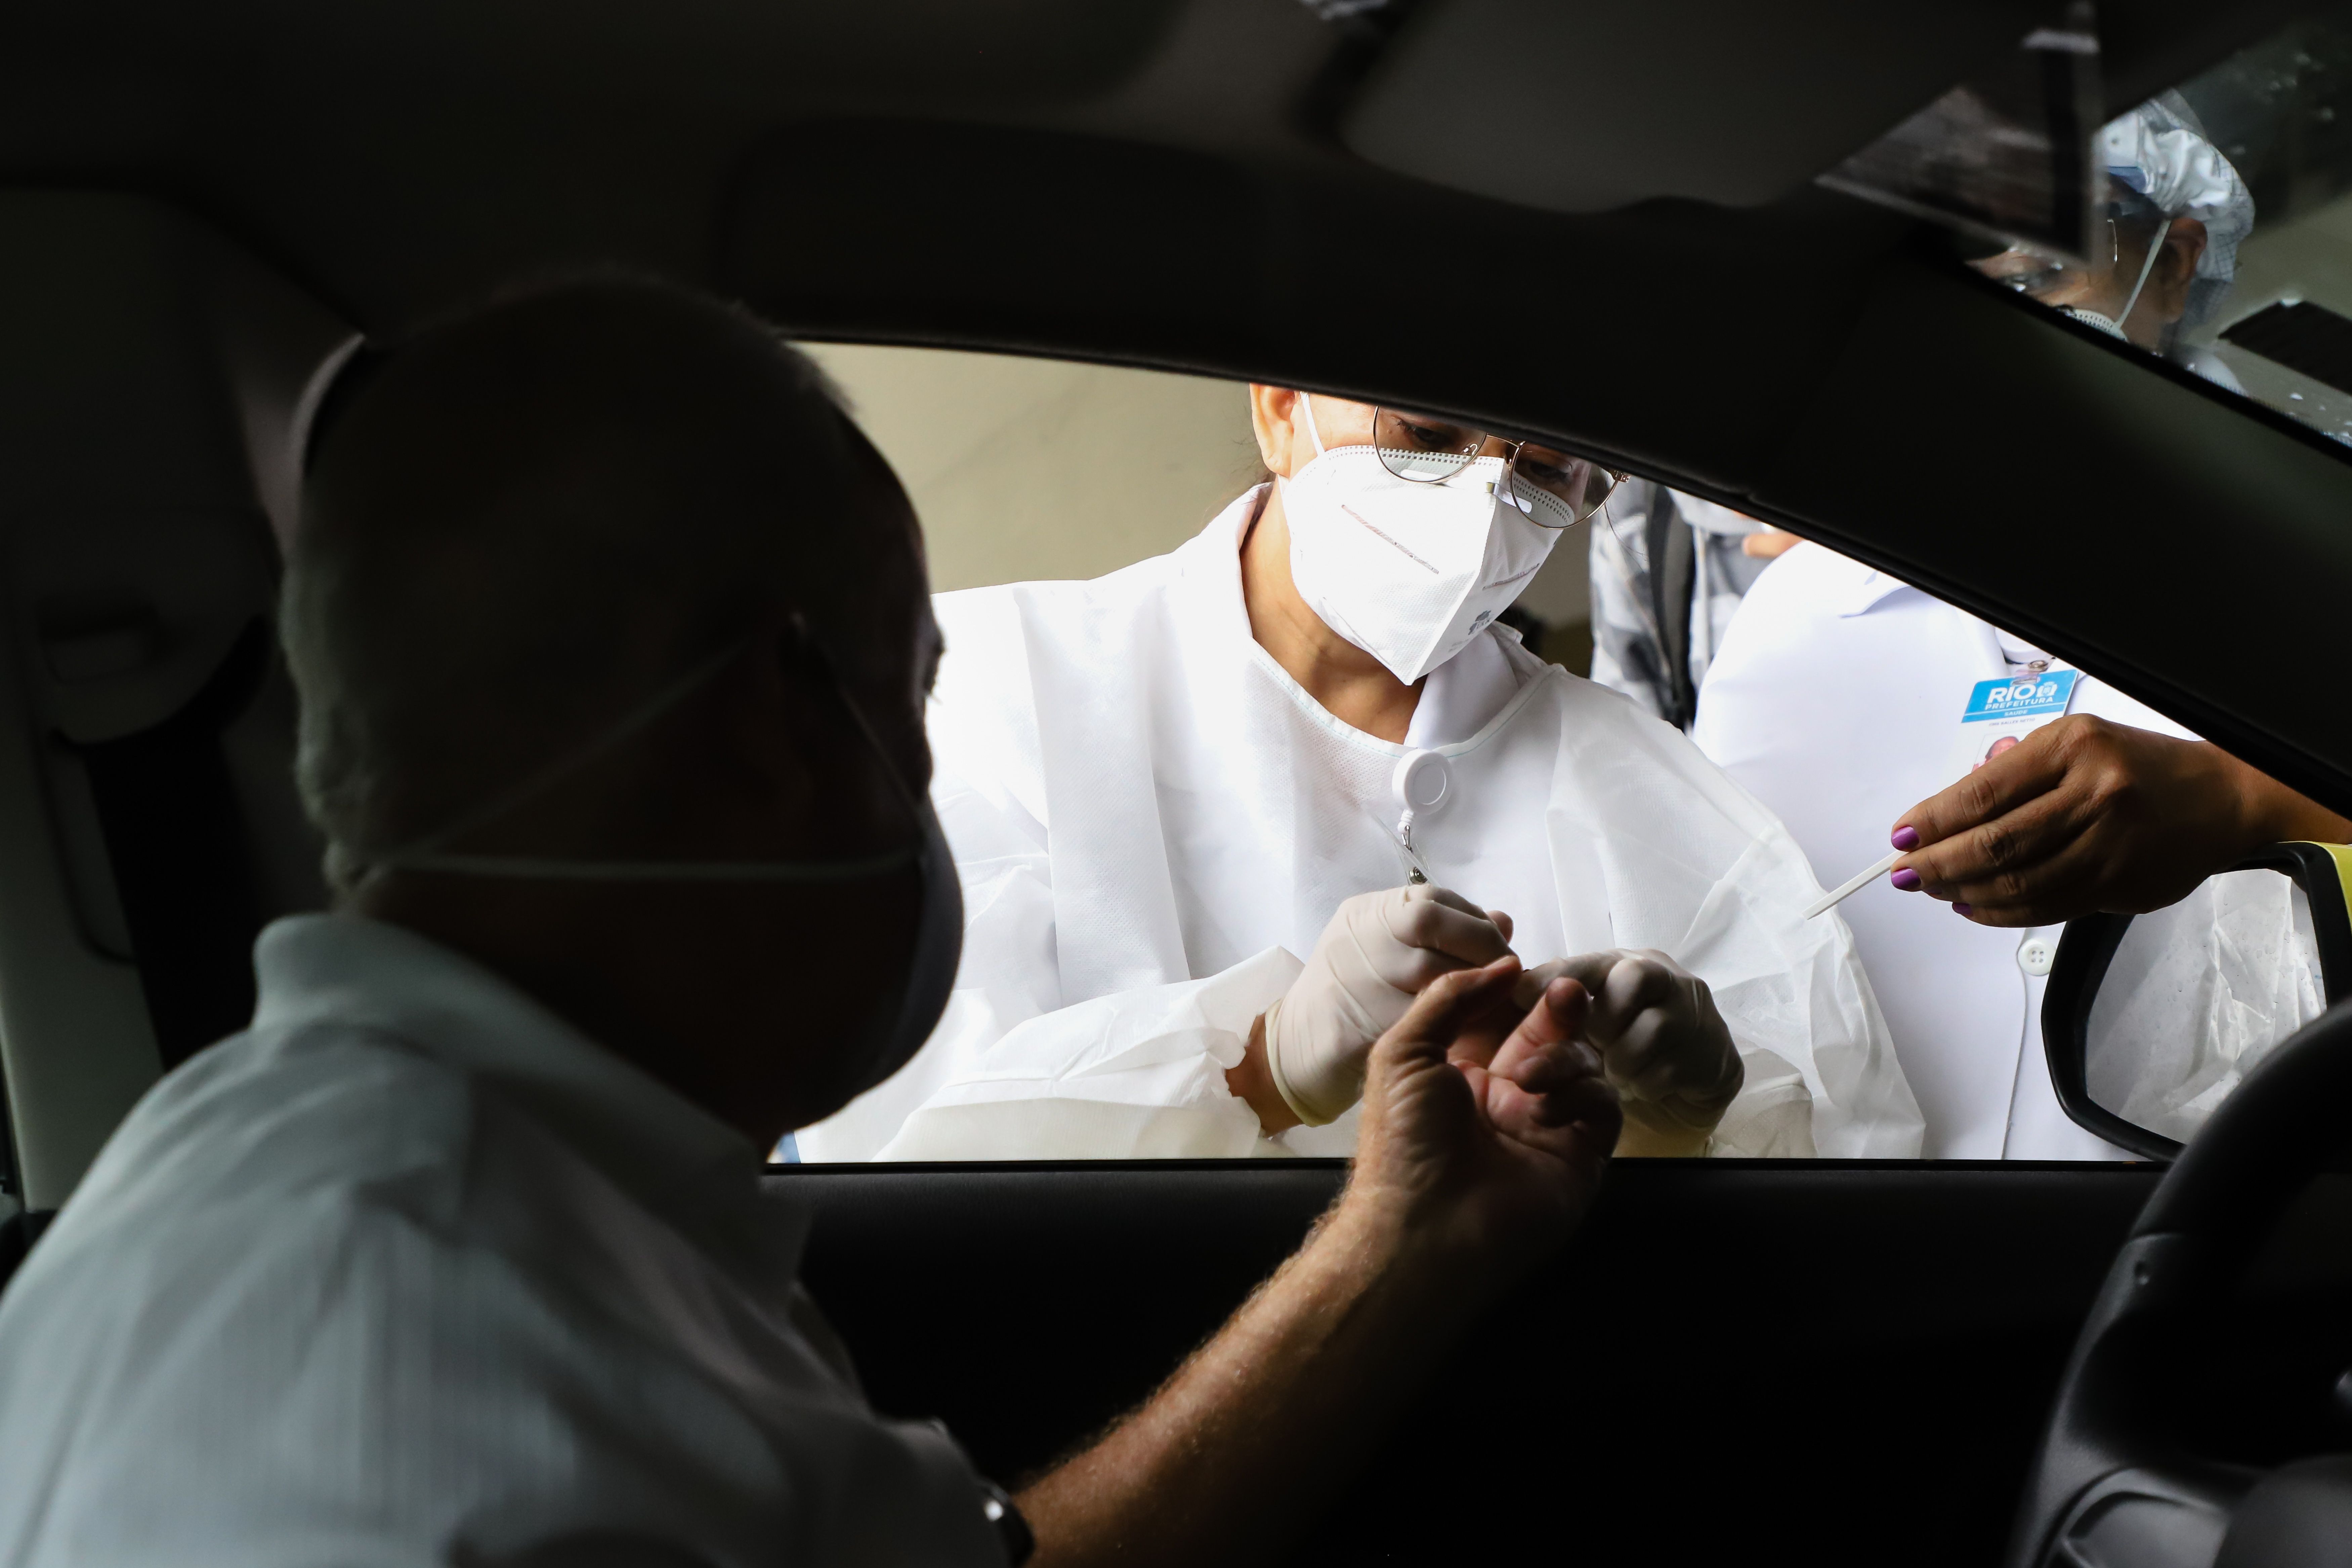 The Rio de Janeiro city hall performs coronavirus tests on taxi drivers at Sambodromo. Image by Andre_MA / Shutterstock. Brazil, 2020.